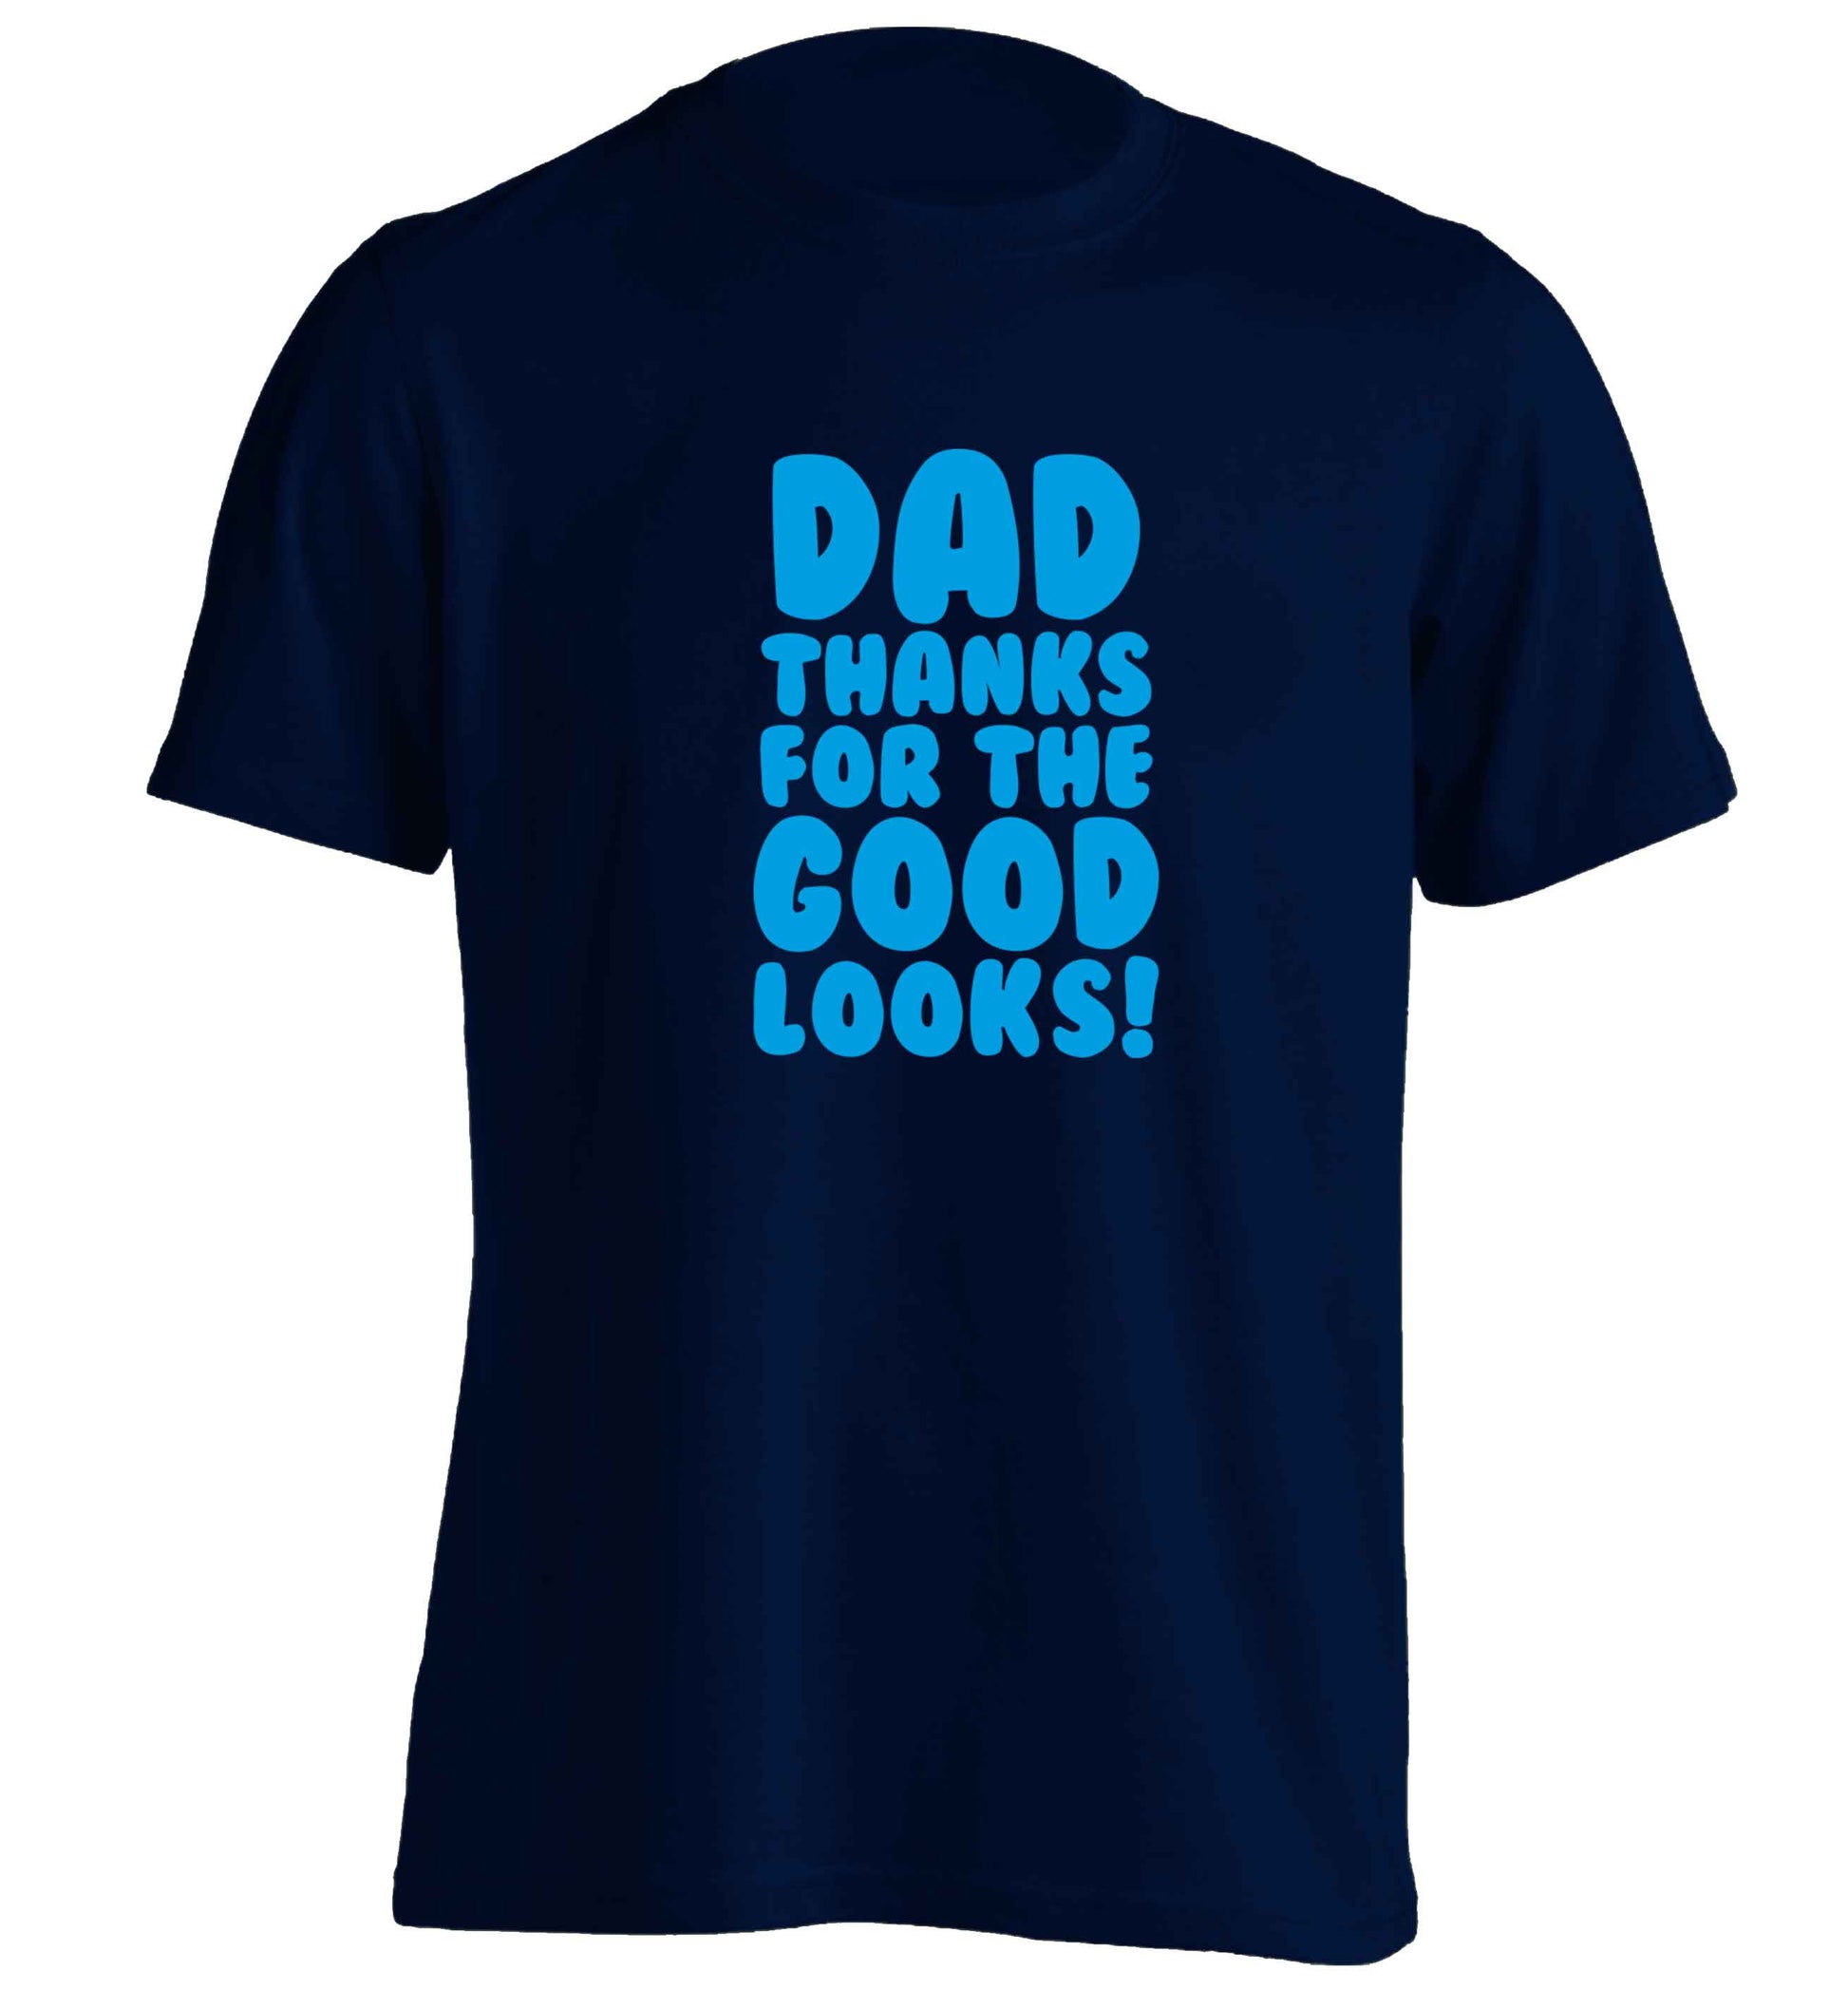 Dad thanks for the good looks adults unisex navy Tshirt 2XL